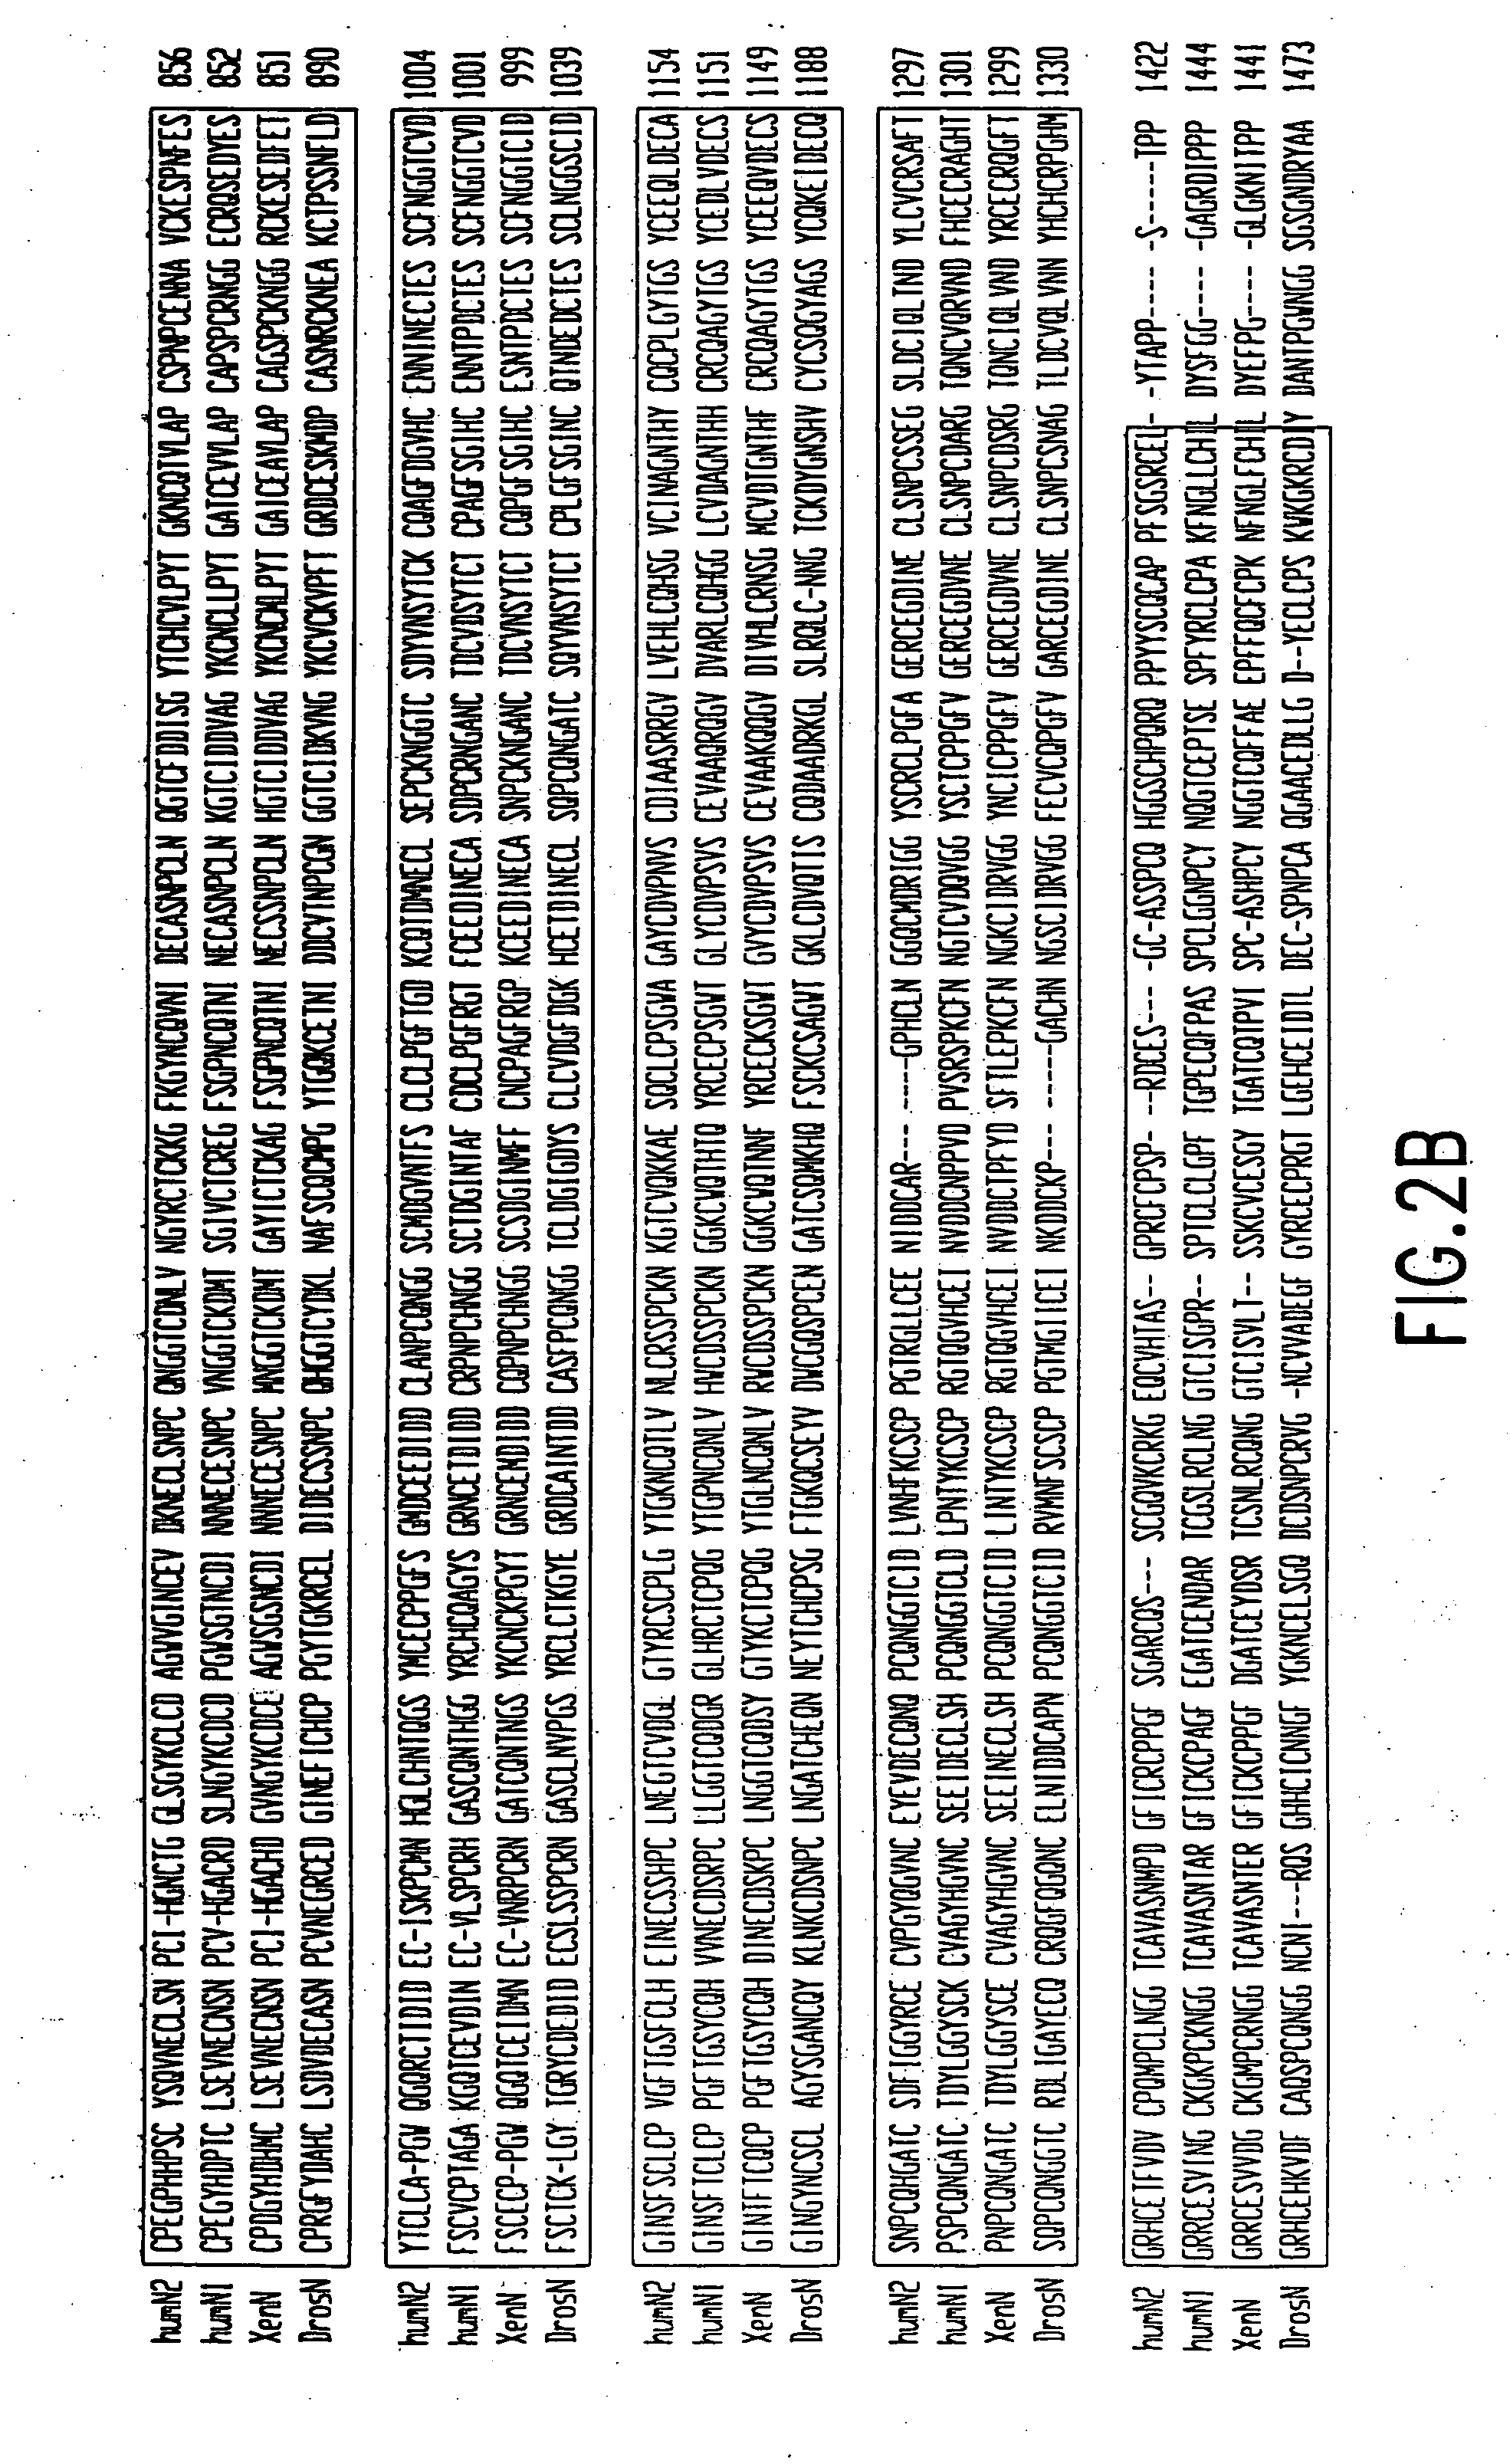 Activated forms of notch and methods based thereon